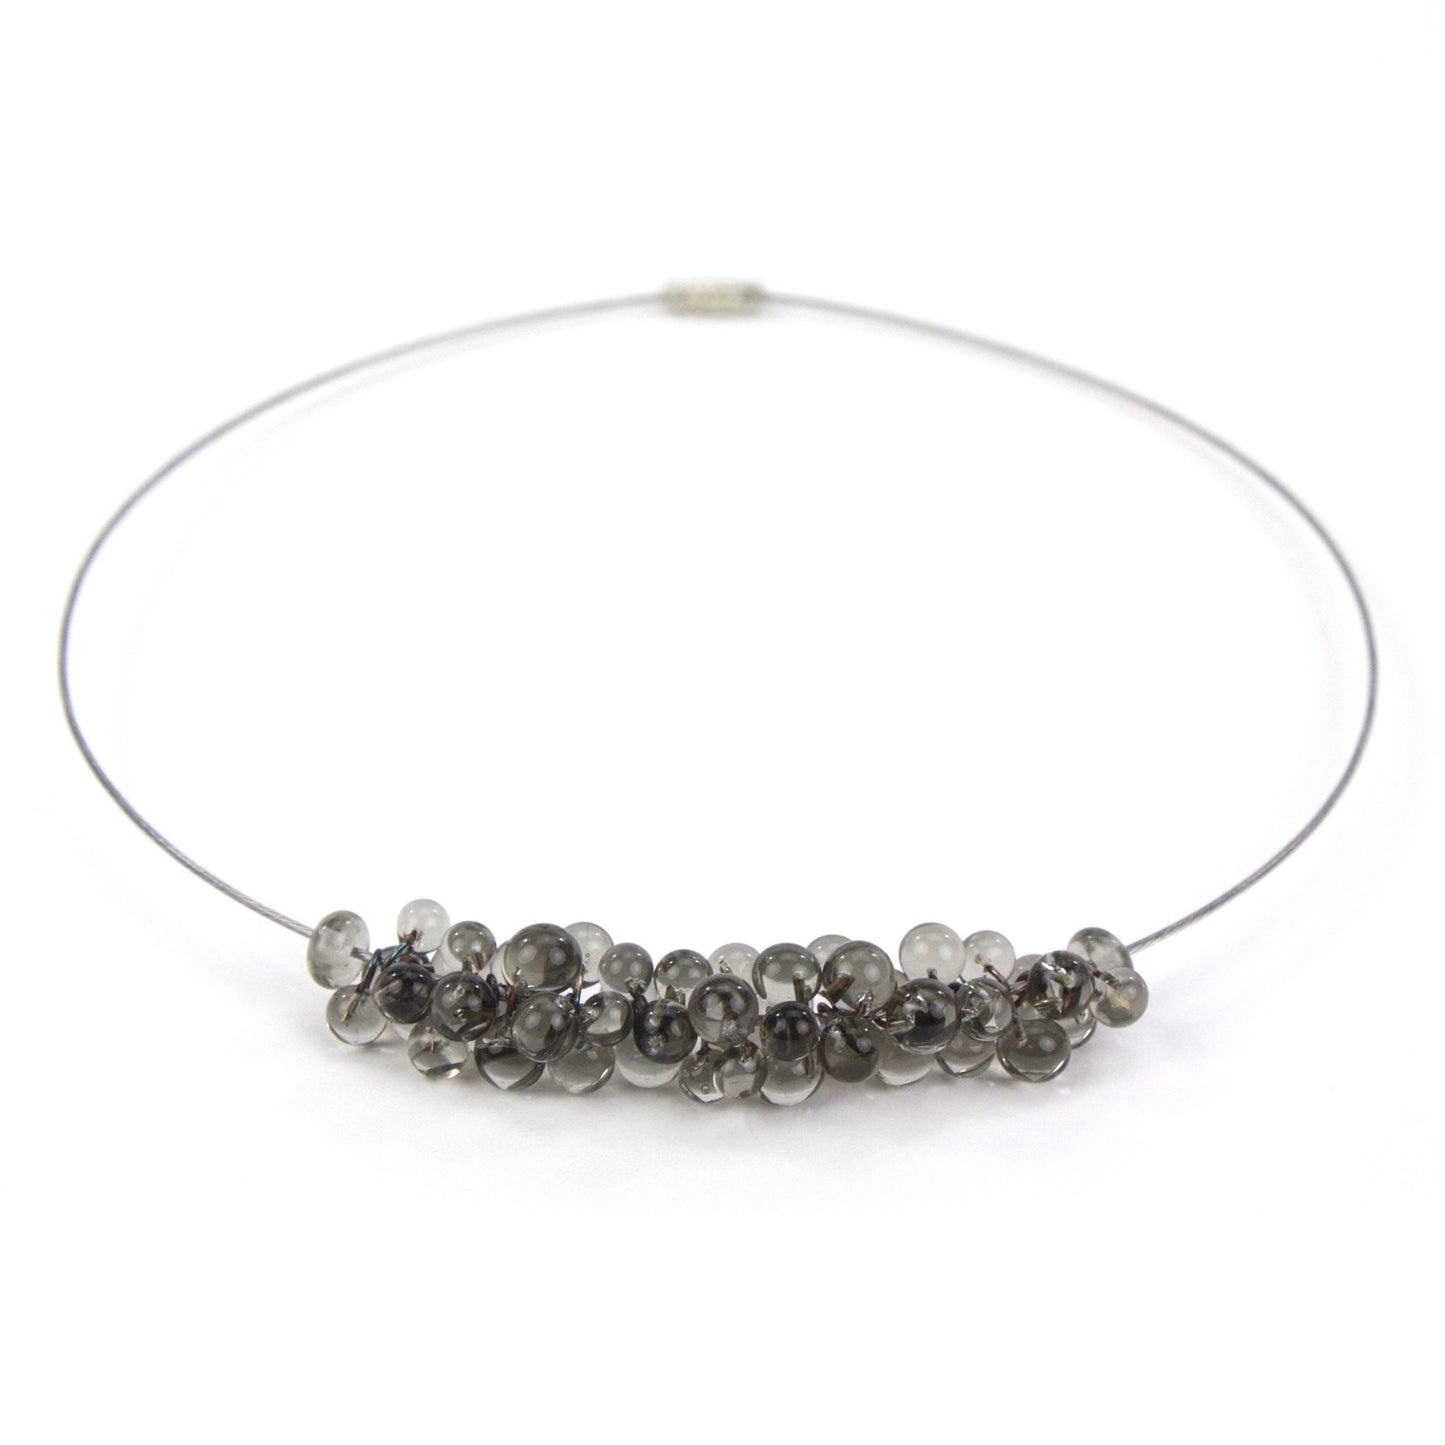 Petite Chroma Necklace in Grey